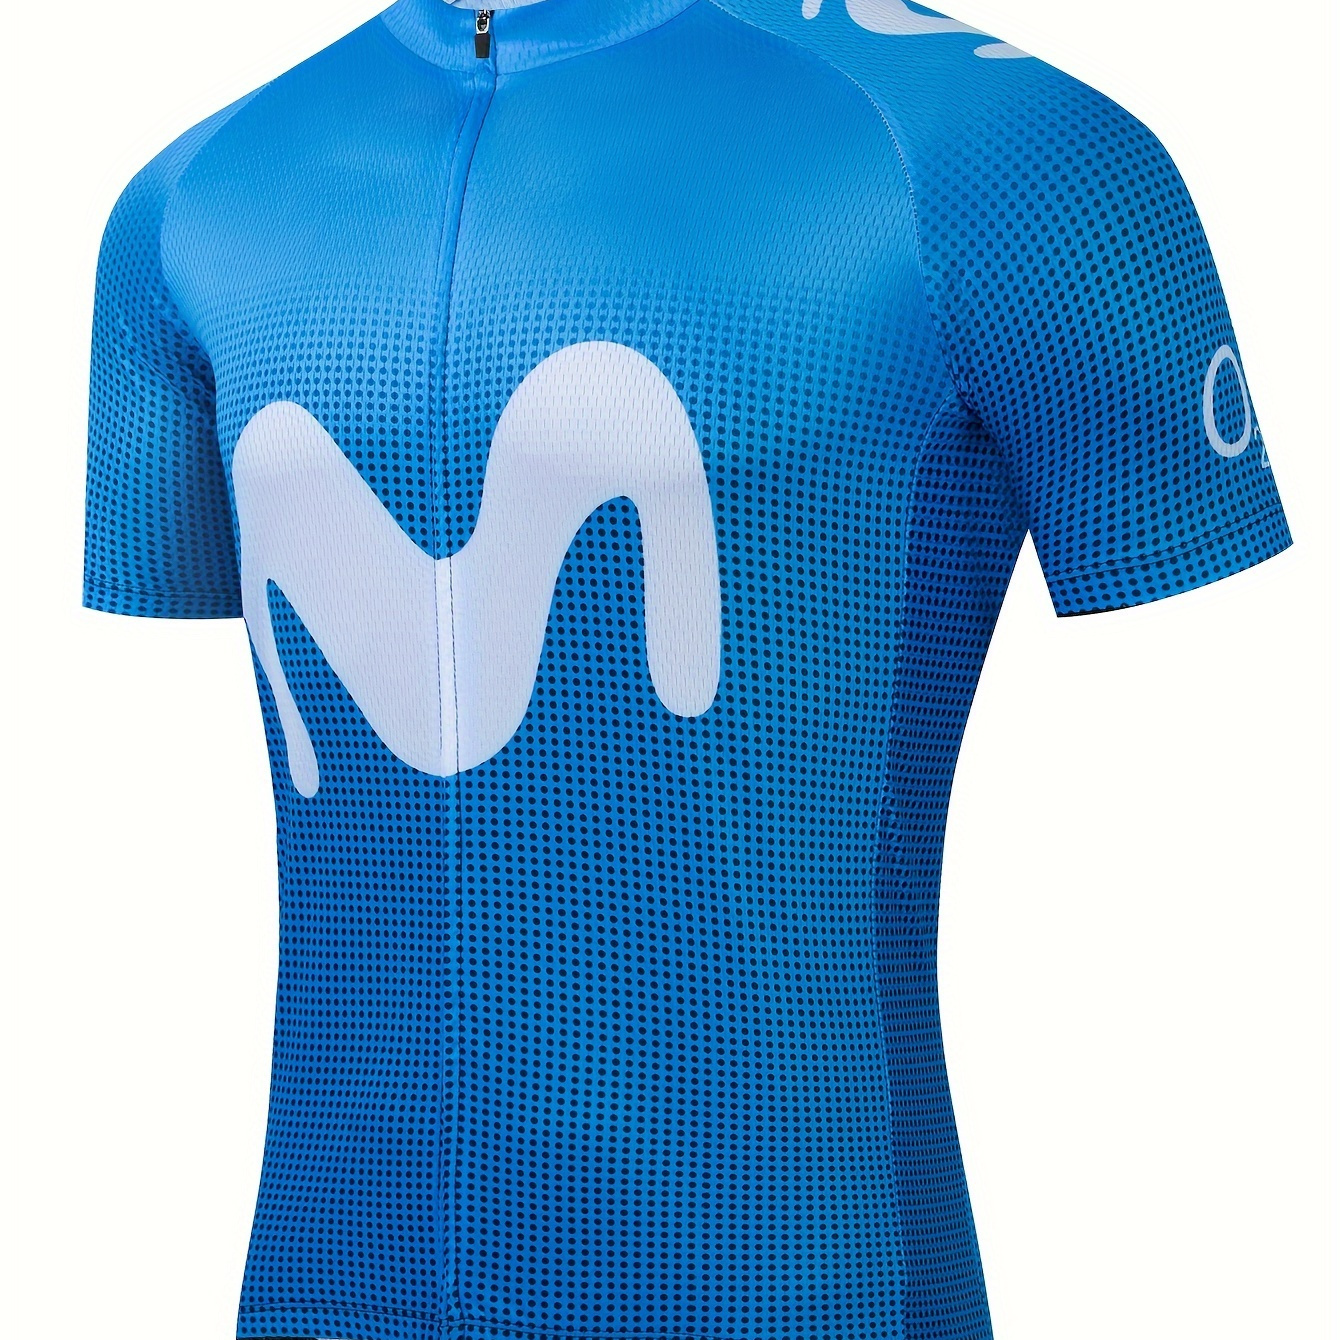 

m" Alphabet Design Short Sleeve Zip-up Cycling Jersey For Men, Breathable Quick Drying Cycling Shirt With 3 Back Pockets For Cyclists